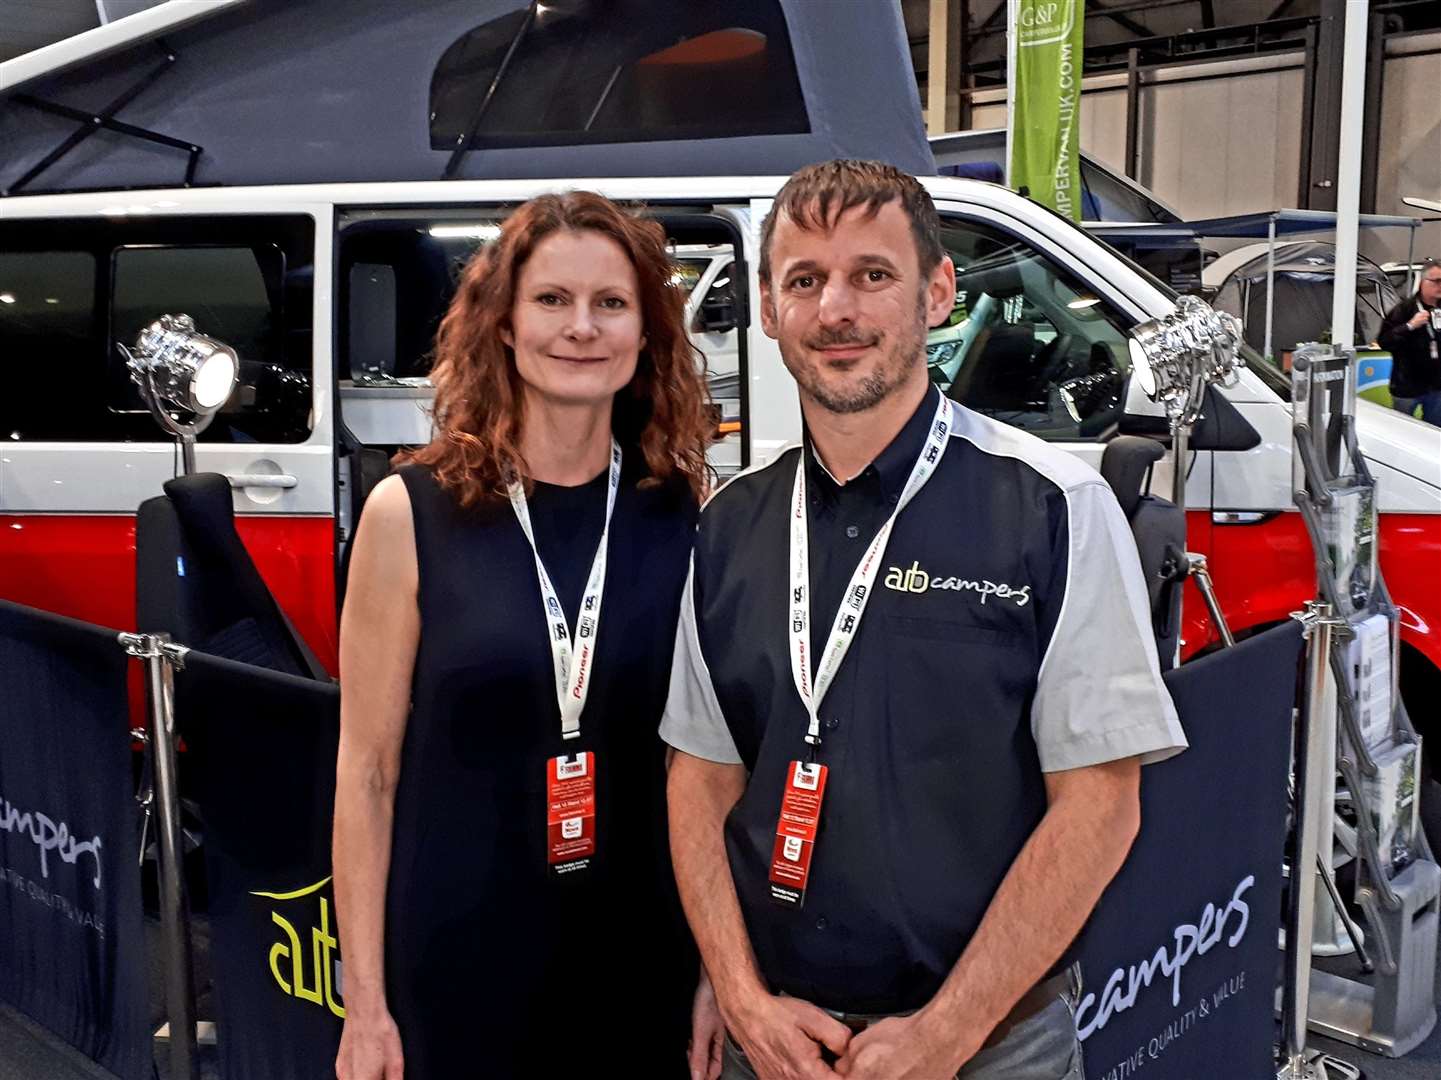 TEAMINGUP: Highland Auto Campers owner Mark Jarratt with girlfriend Alicia.